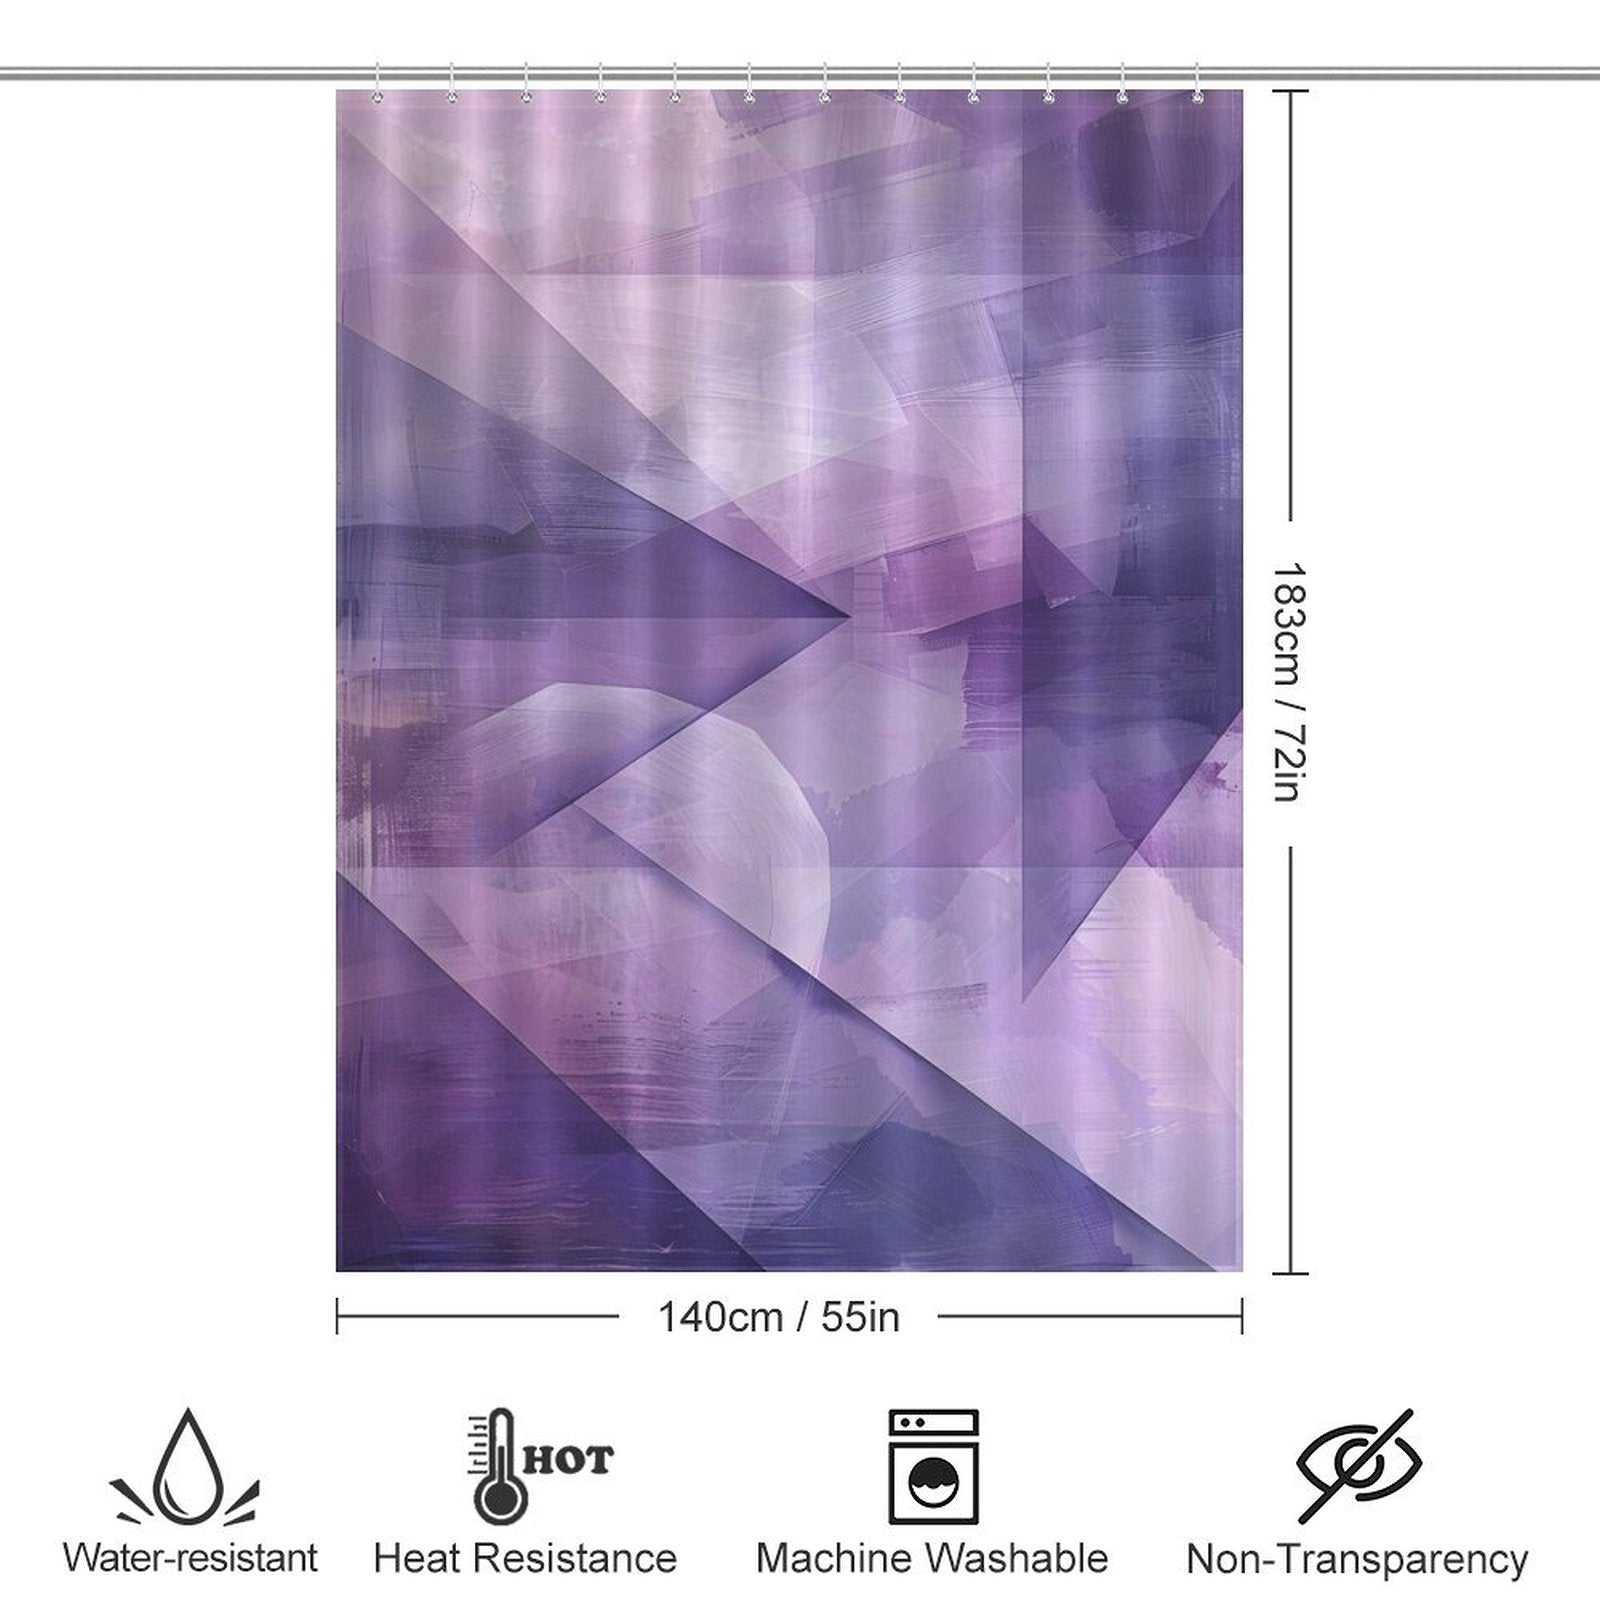 A **Purple Abstract Modern Boho Geometric Art Minimalist Shower Curtain-Cottoncat** measuring 183 cm by 140 cm, perfect for adding a touch of minimalist bathroom decor. Its features include water resistance, heat resistance, machine washability, and non-transparency.